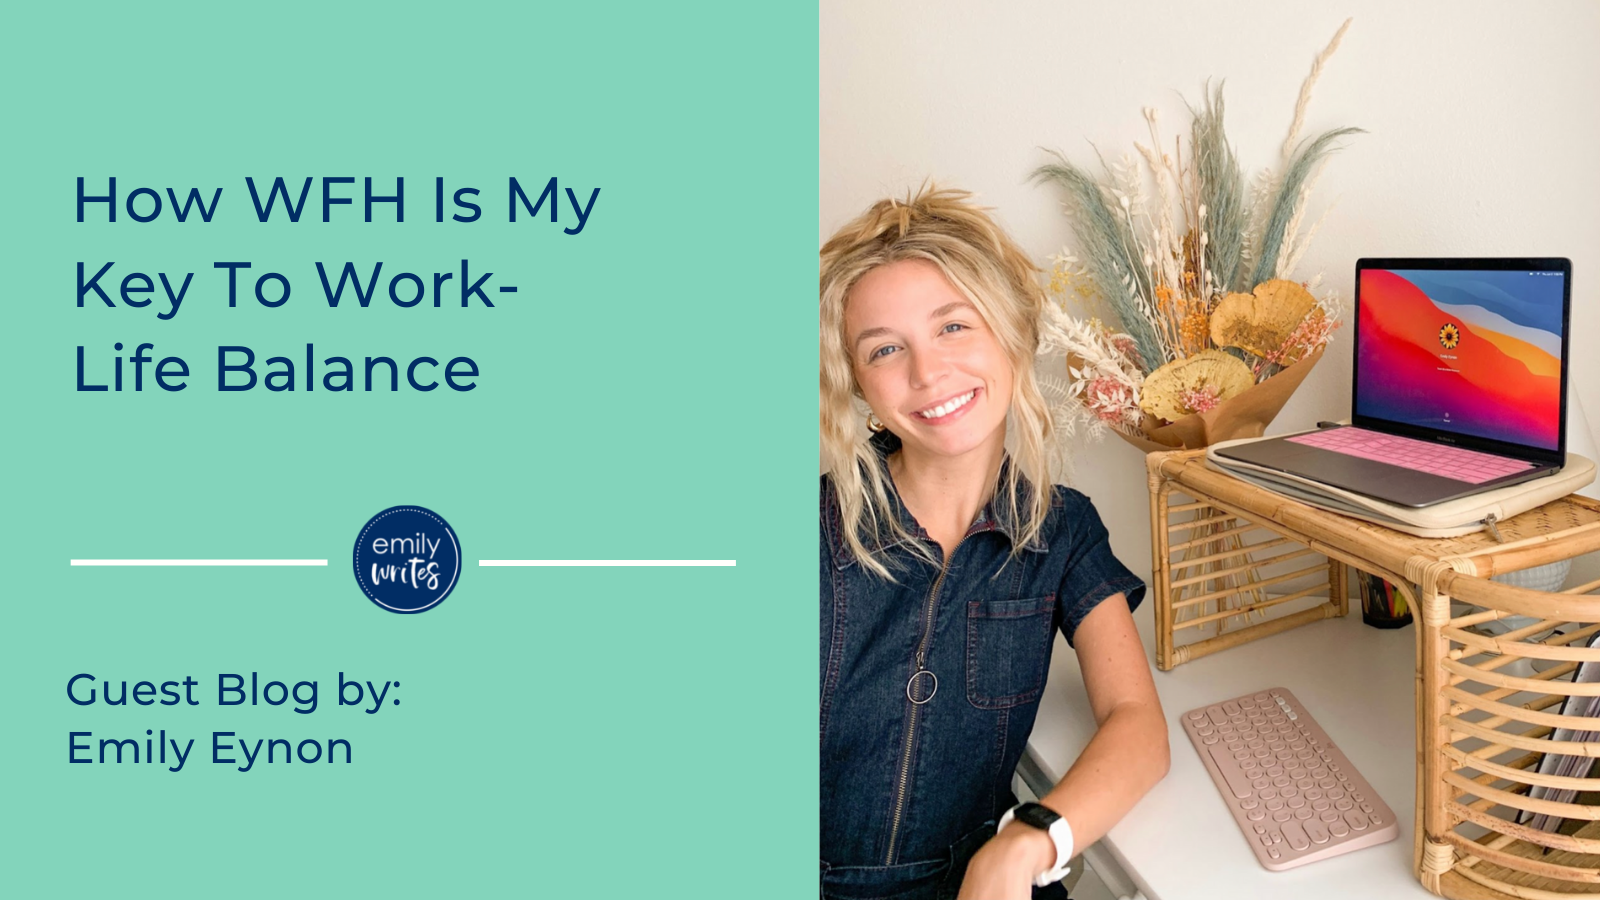 How WFH Is My Key To Work-Life Balance